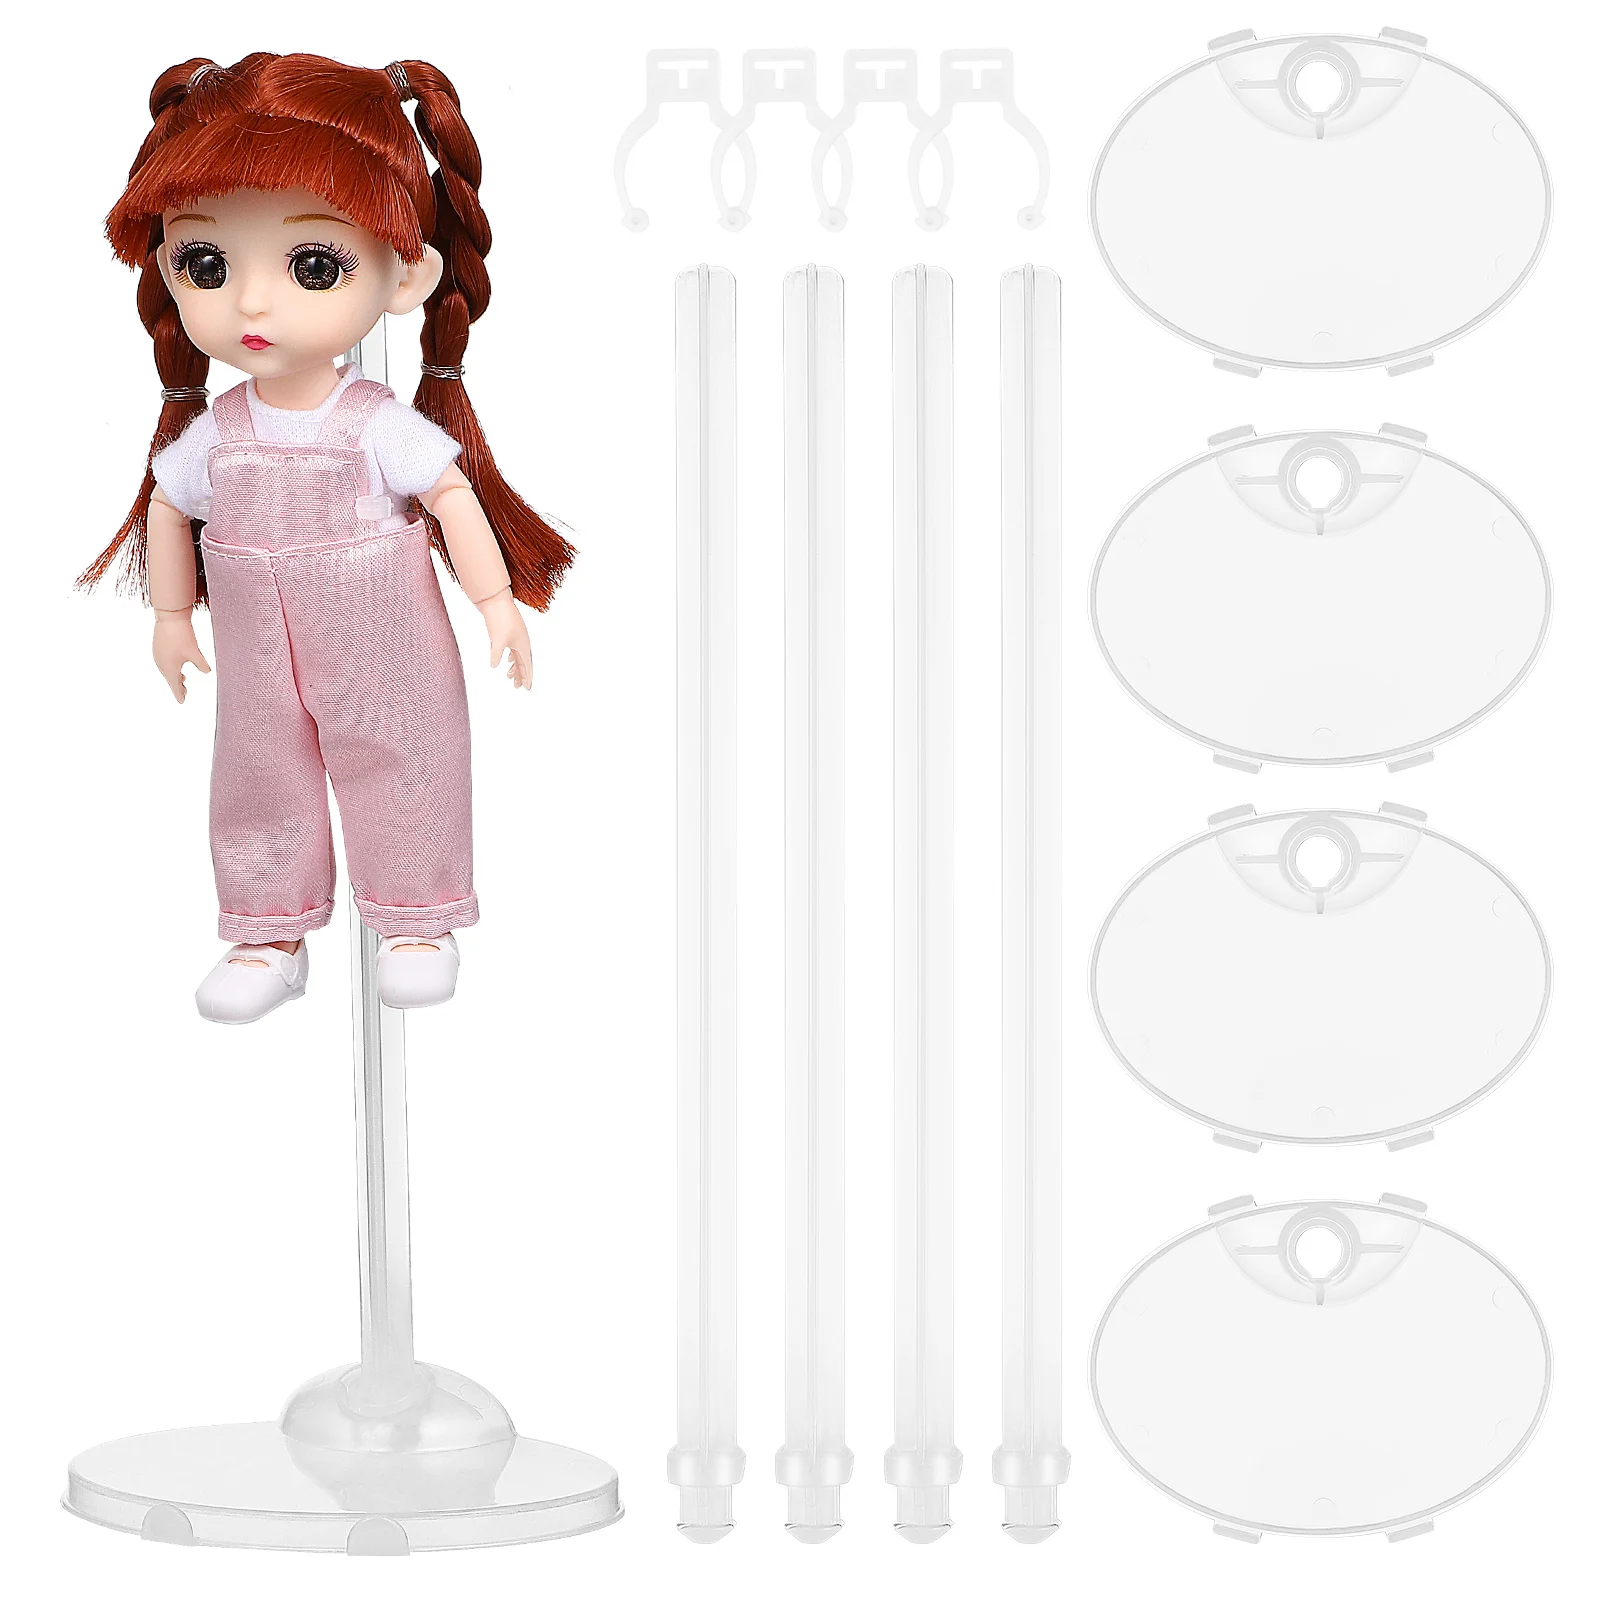 

4 Pcs Stable Sturdy Display Accessories Brackets Action Figure Holder Stands Support Stands Holders Racks